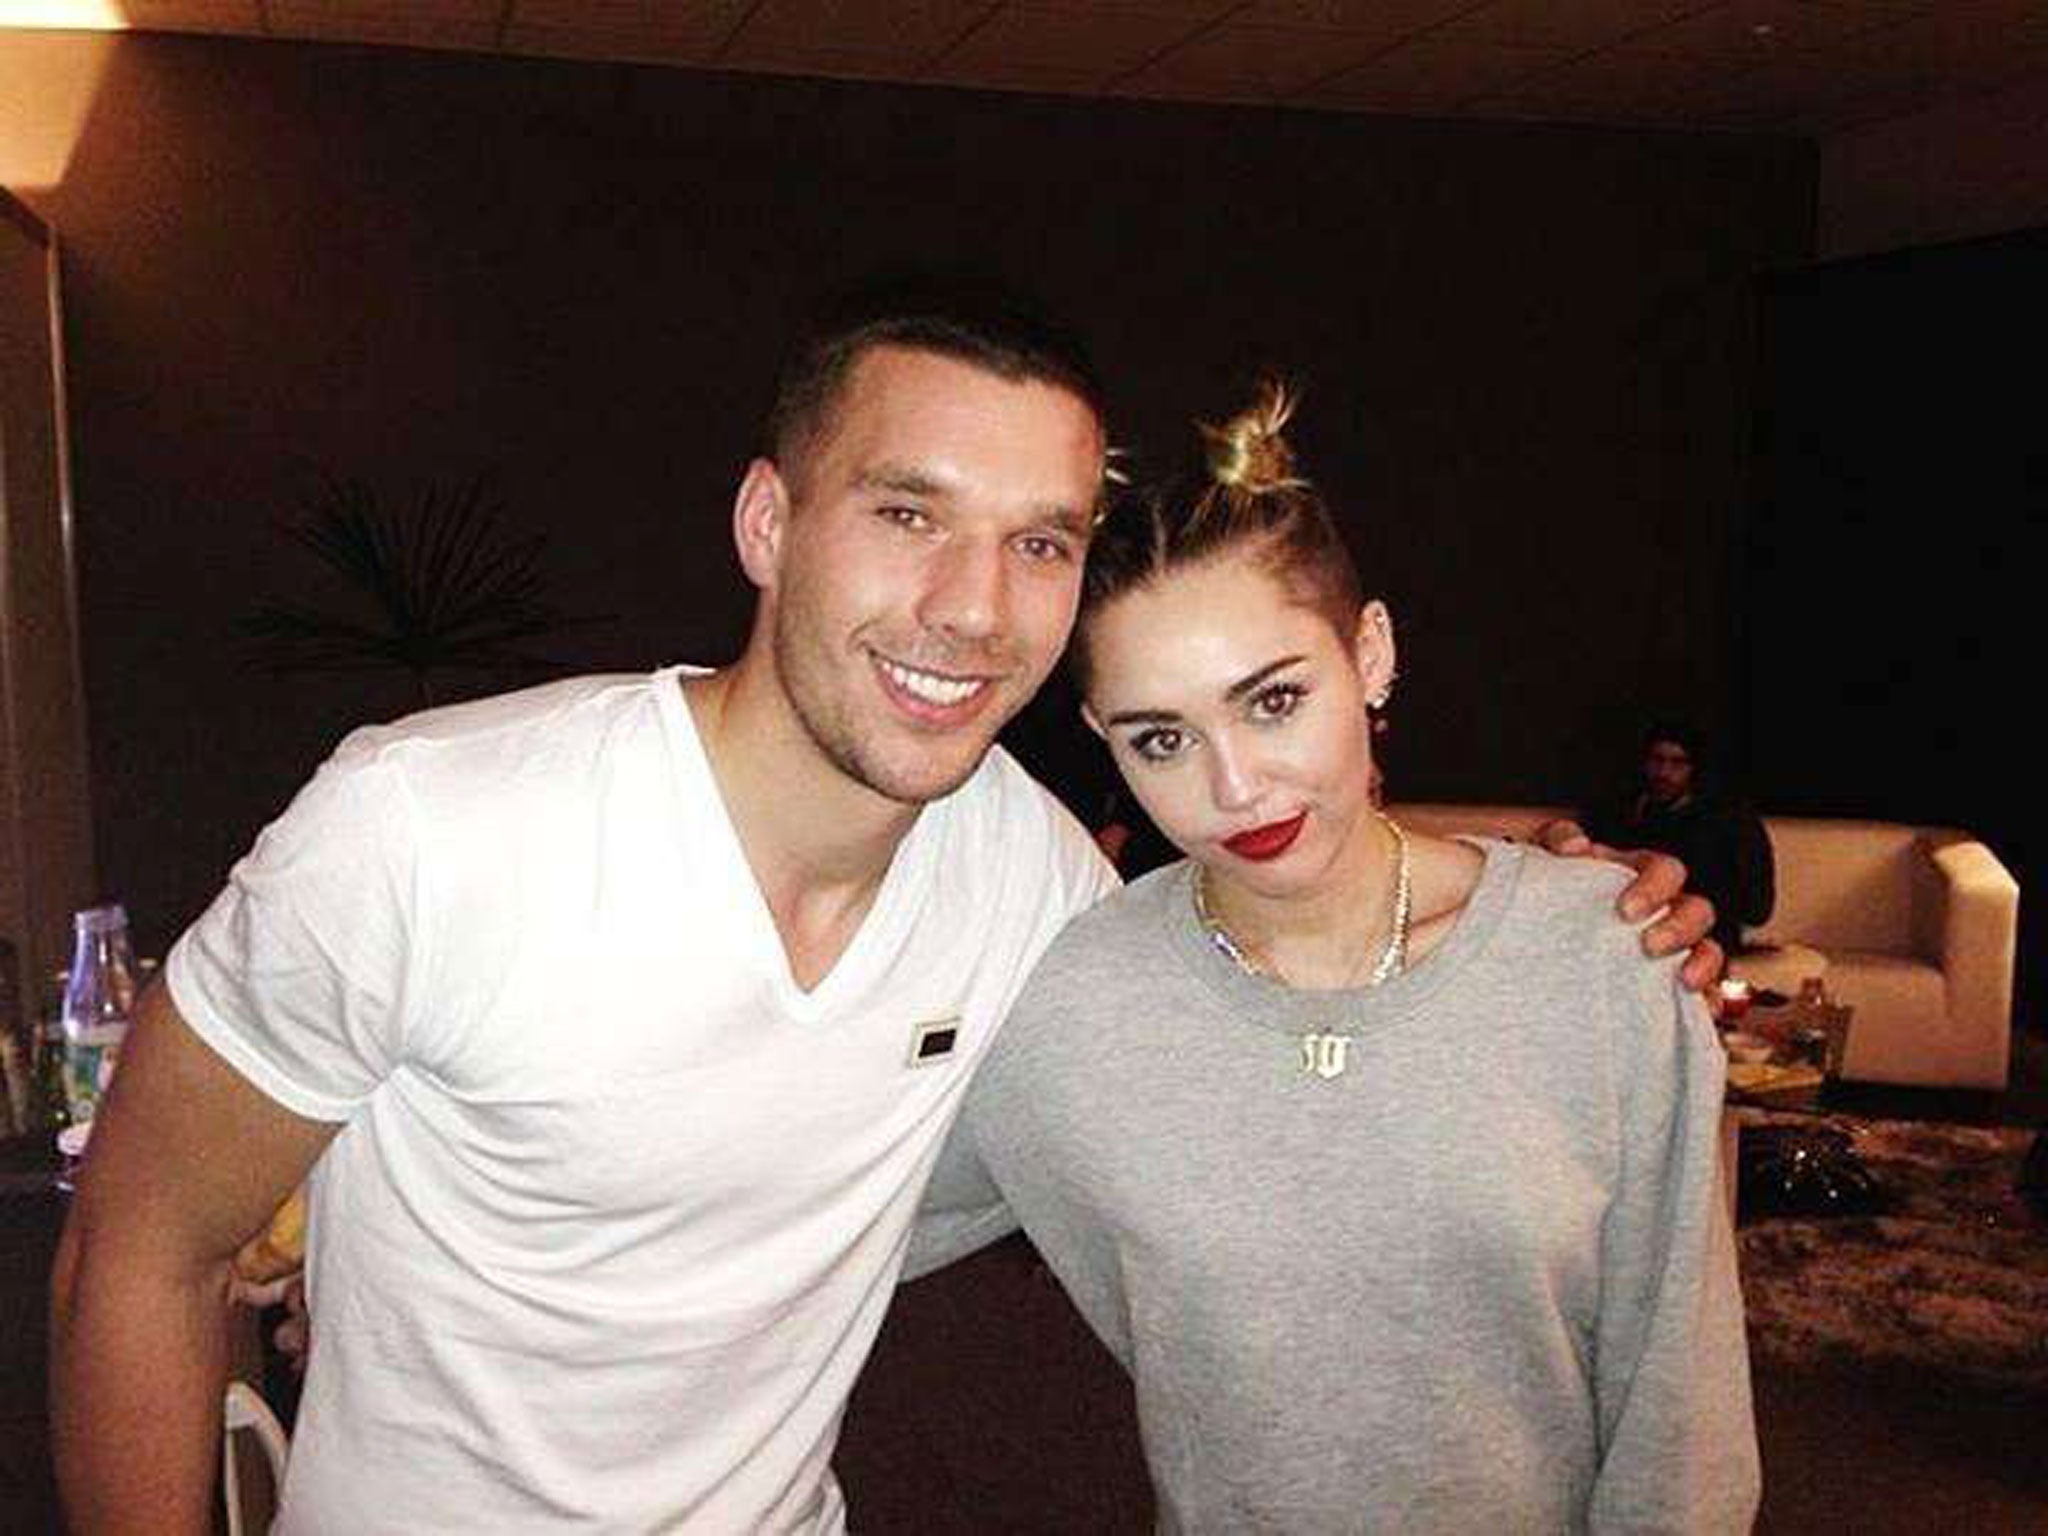 Lukas Podolski pictured with Miley Cyrus